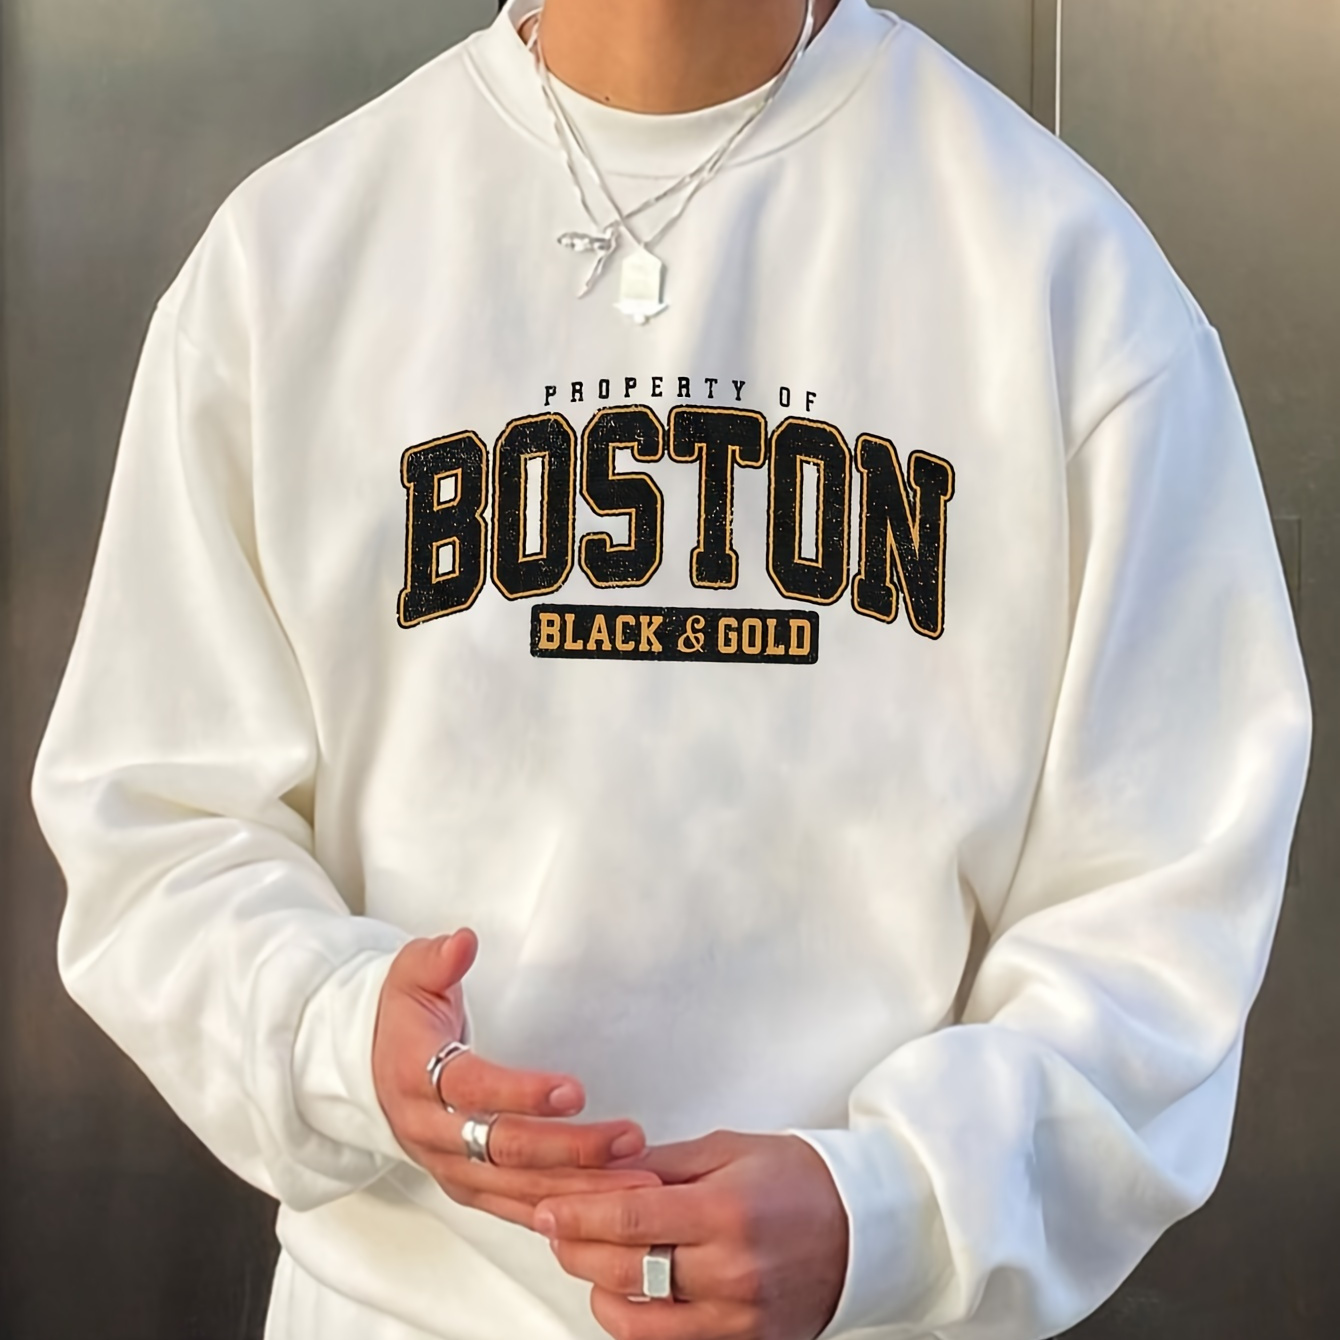 

Boston Print Fashionable Men's Casual Long Sleeve Crew Neck Pullover Sweatshirt, Suitable For Outdoor Sports, For Autumn Spring, Can Be Paired With Hip-hop Necklace, As Gifts